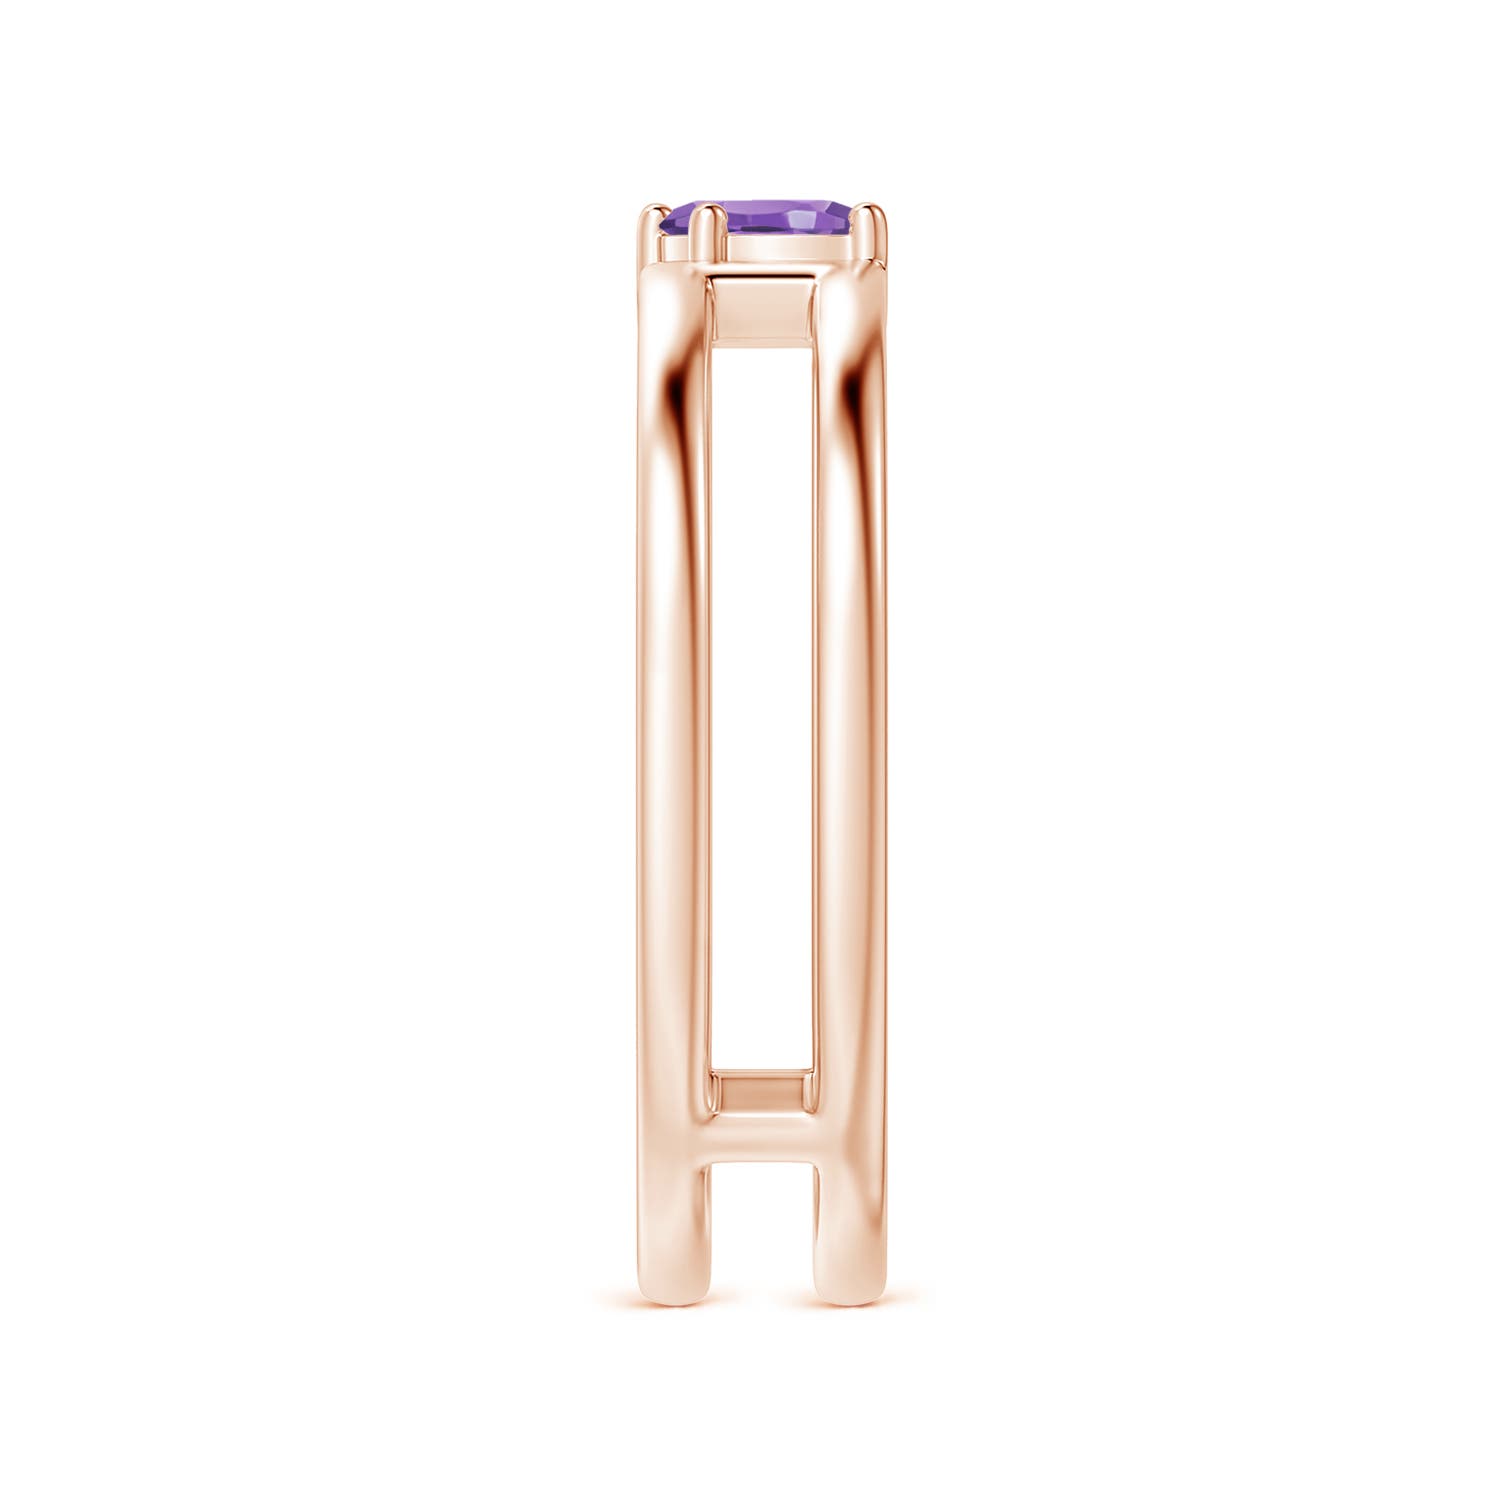 AA - Amethyst / 0.13 CT / 14 KT Rose Gold